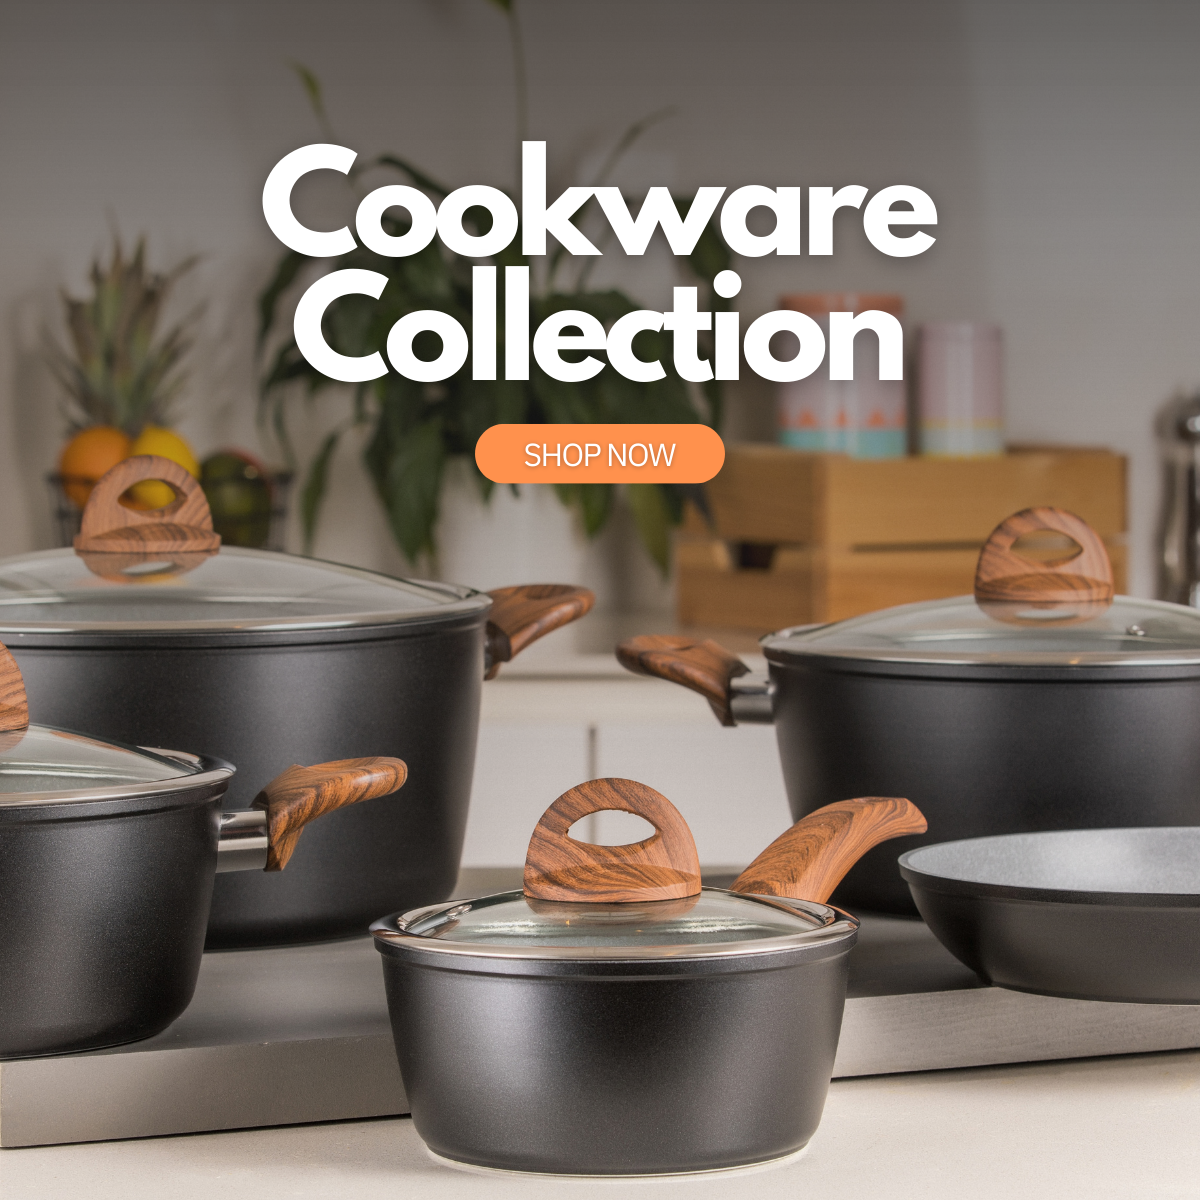 A premium 5 piece wooden cookware set on top of a kitchen countertop